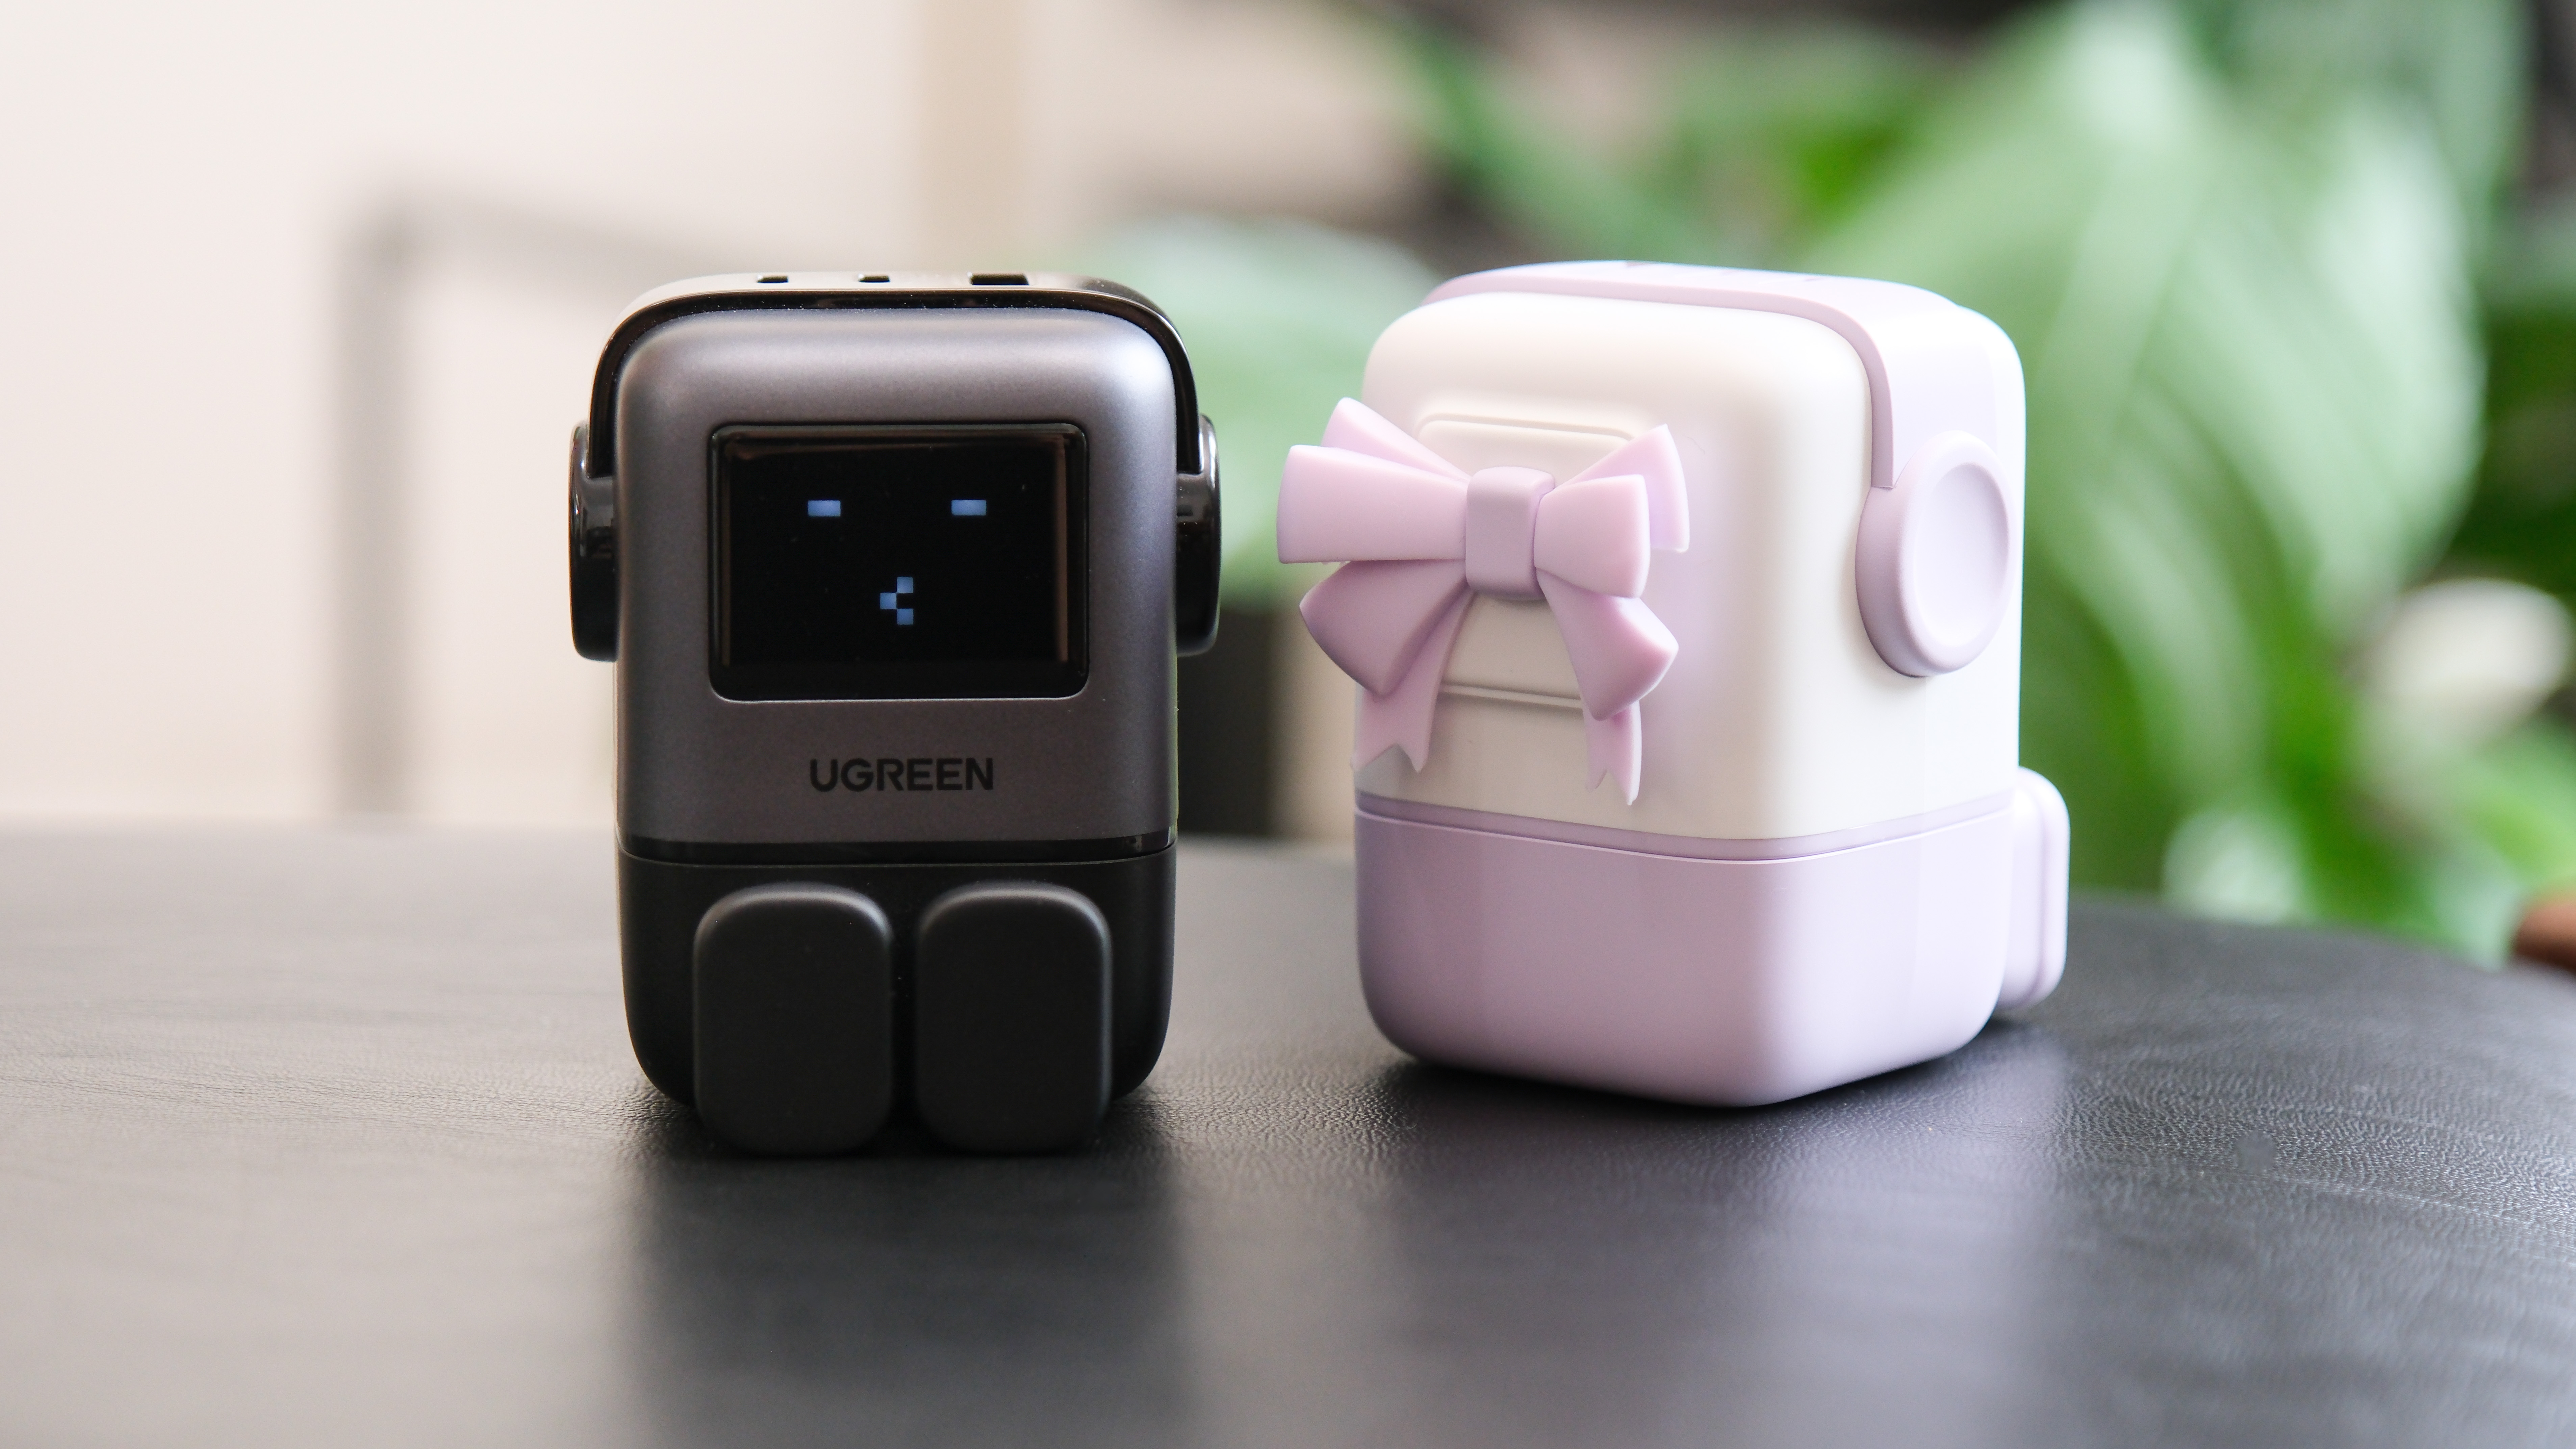 Ugreen Nexode RG charger review: this might be the most adorable charger ever